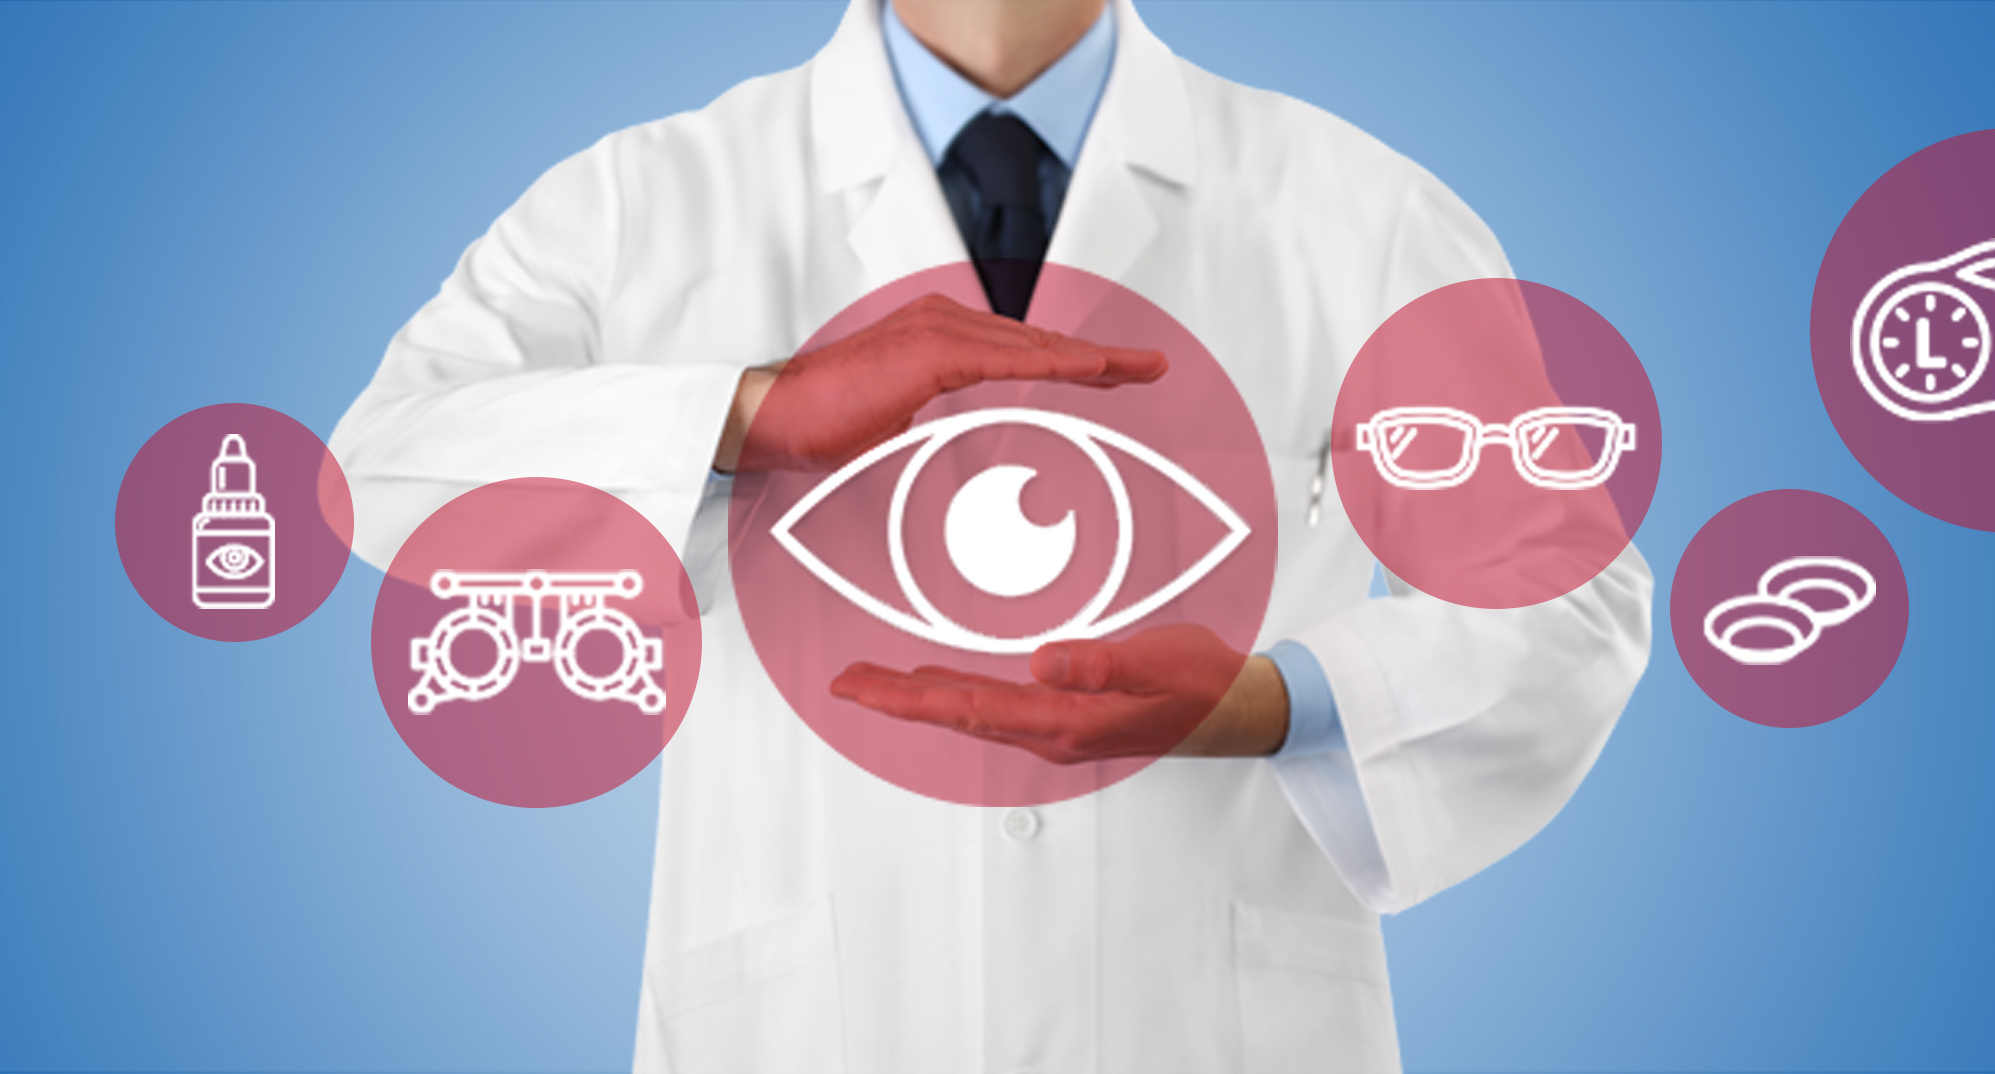 Eye doctor with optical related icons